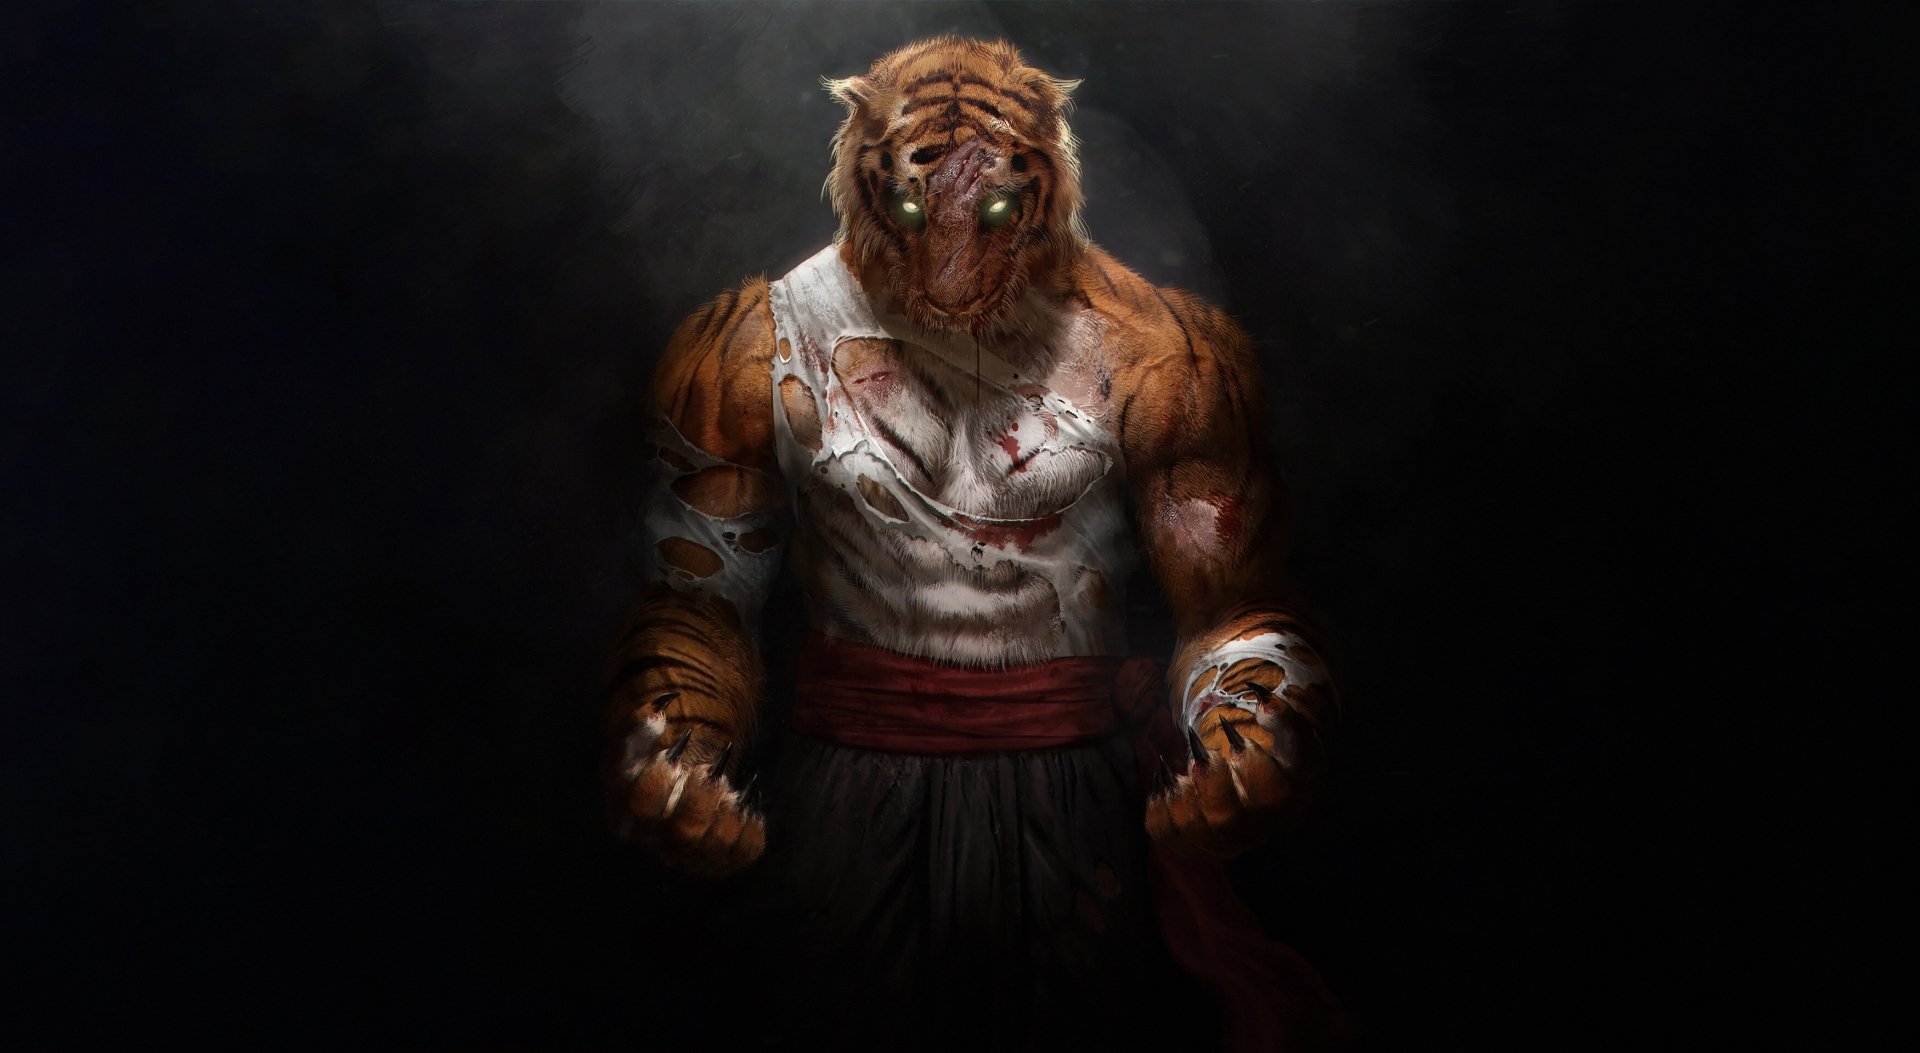 A fierce tiger warrior standing proudly, embodying a fantasy world in a high-definition desktop wallpaper.